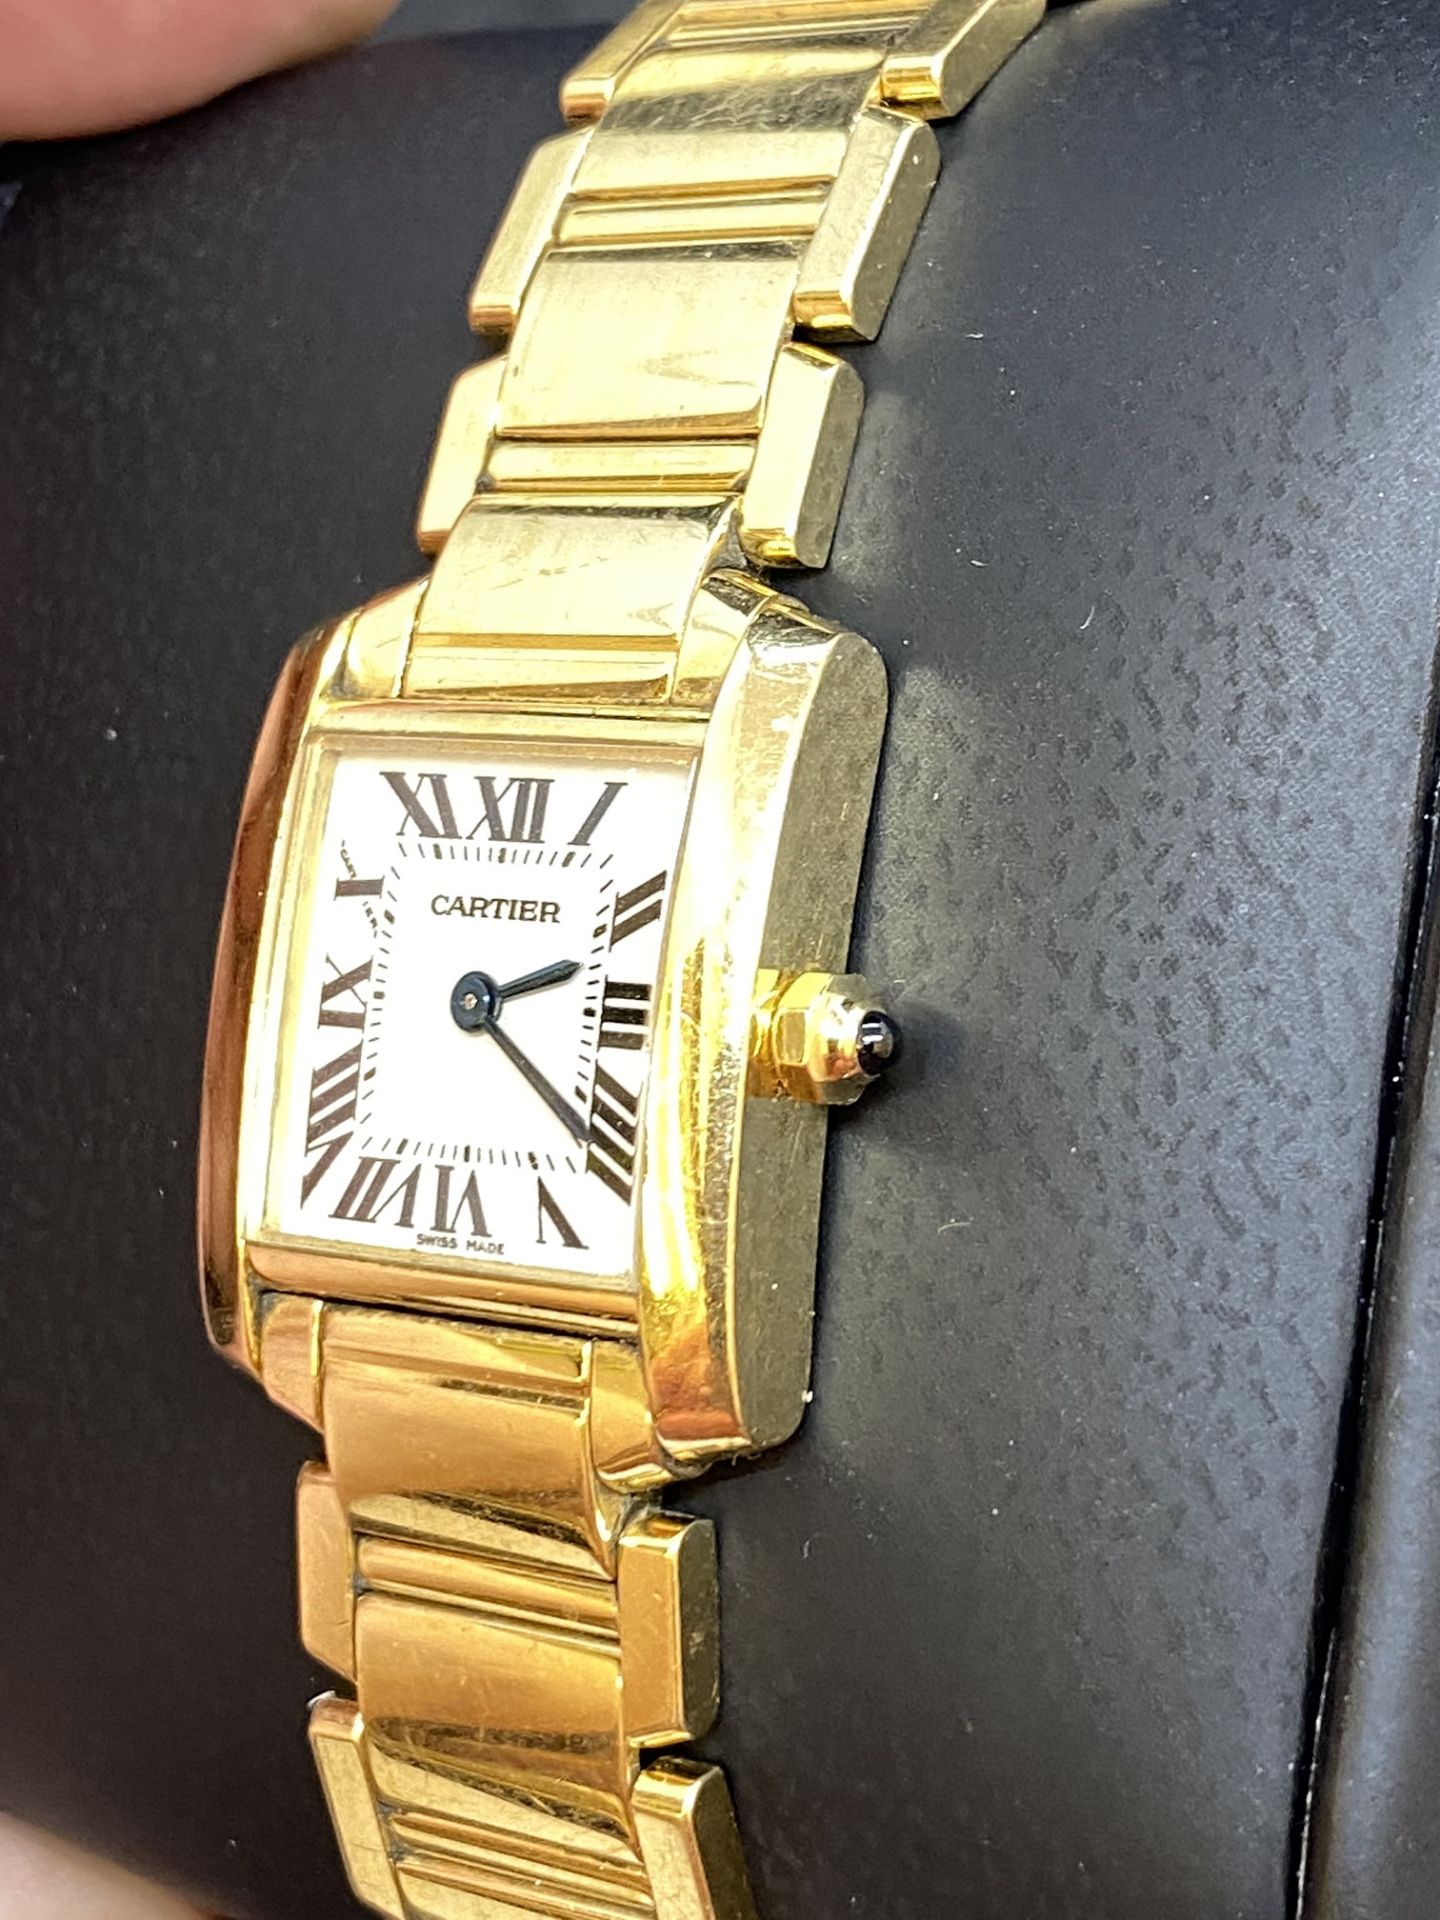 18ct GOLD CARTIER TANK FRANCAISE LADIES WATCH 2385 - Image 4 of 9